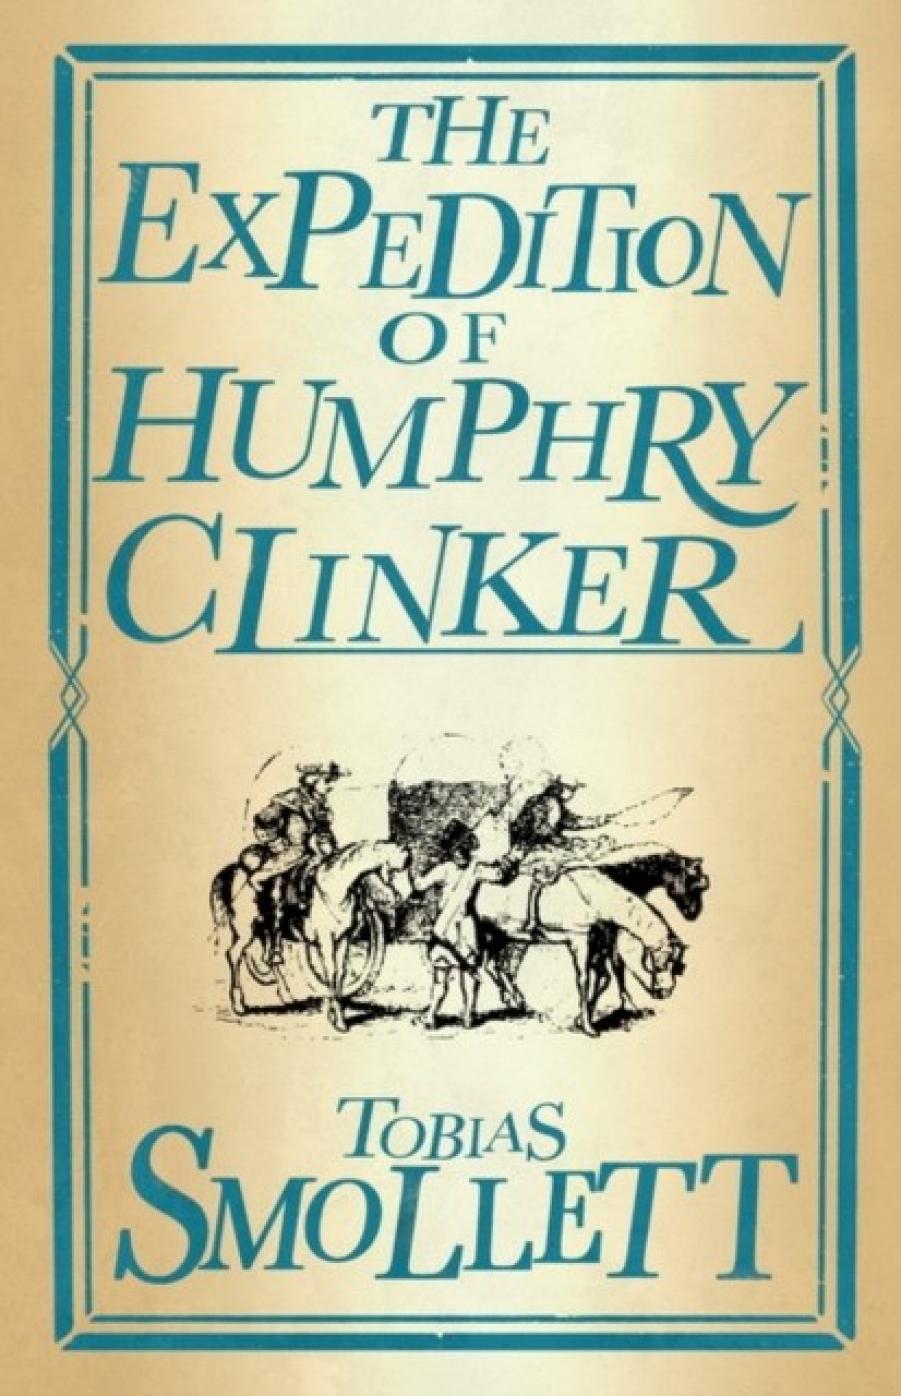 Smollett Tobias The Expedition of Humphry Clinker 